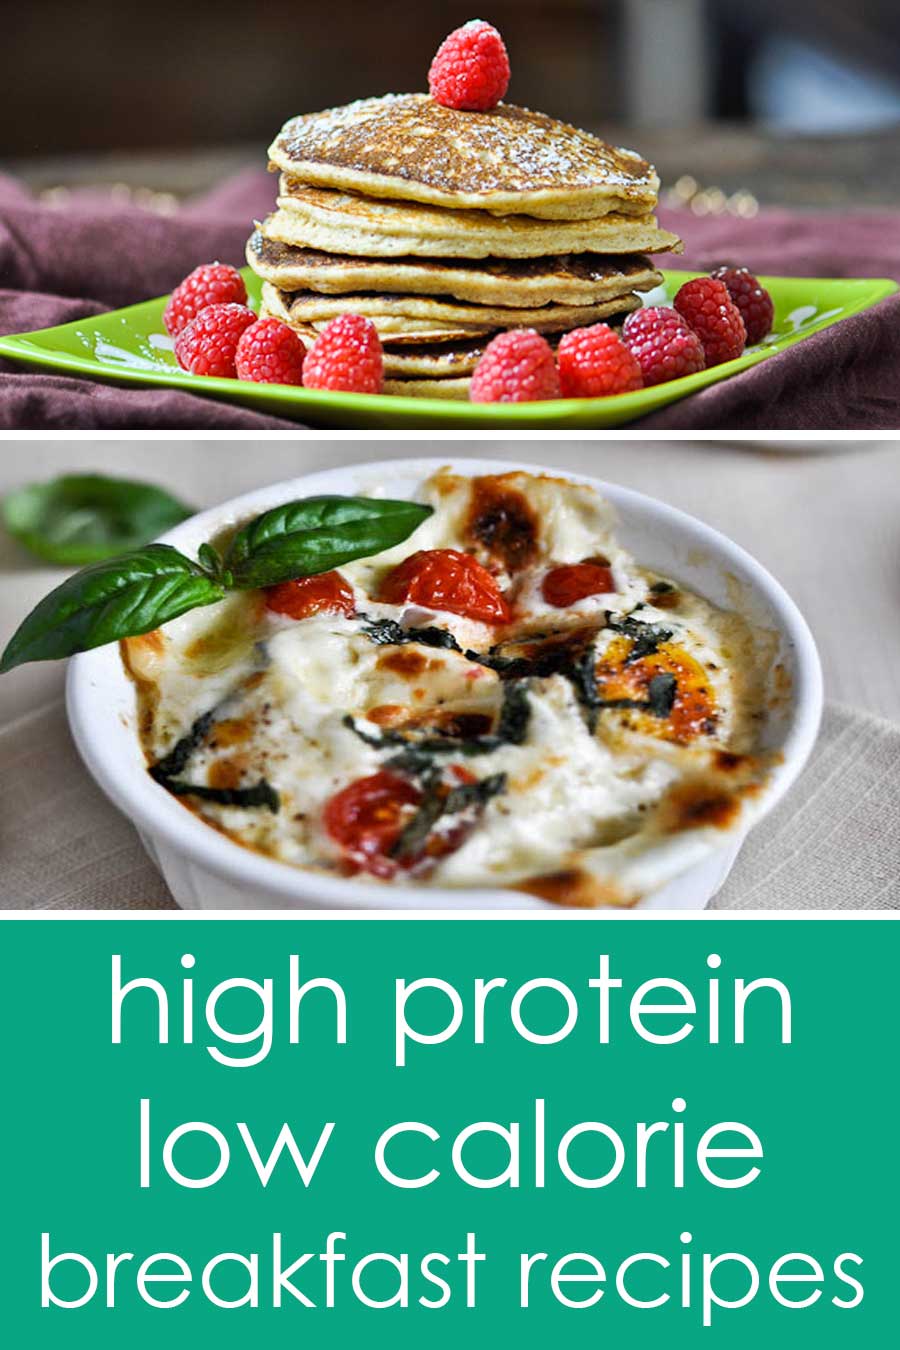 22 High protein, low calorie breakfast recipes